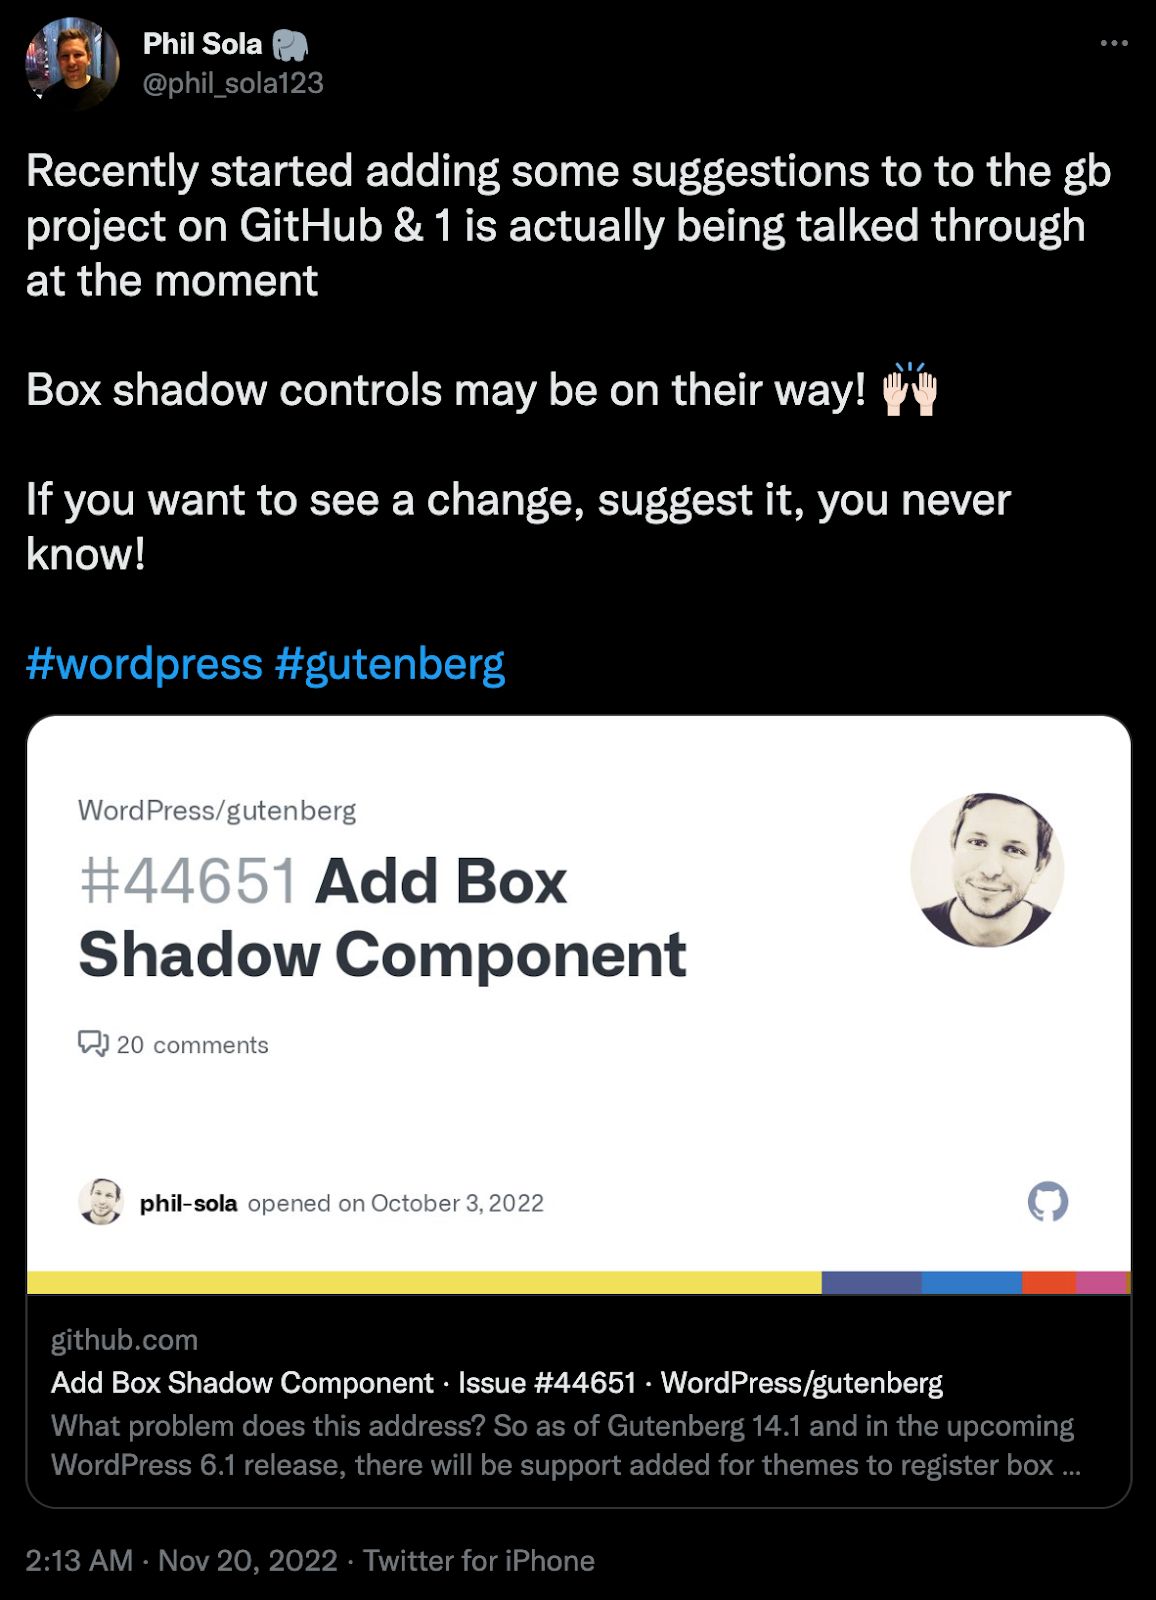 Phil Sola's tweet that reads "Recently started adding some suggestions to the gb project on GitHub and 1 is actually being talked through at the moment. Box shadow controls may be on their way, high five emoji. If you want to see a change, suggest it, you never know. There is a screengrab of the related github project.